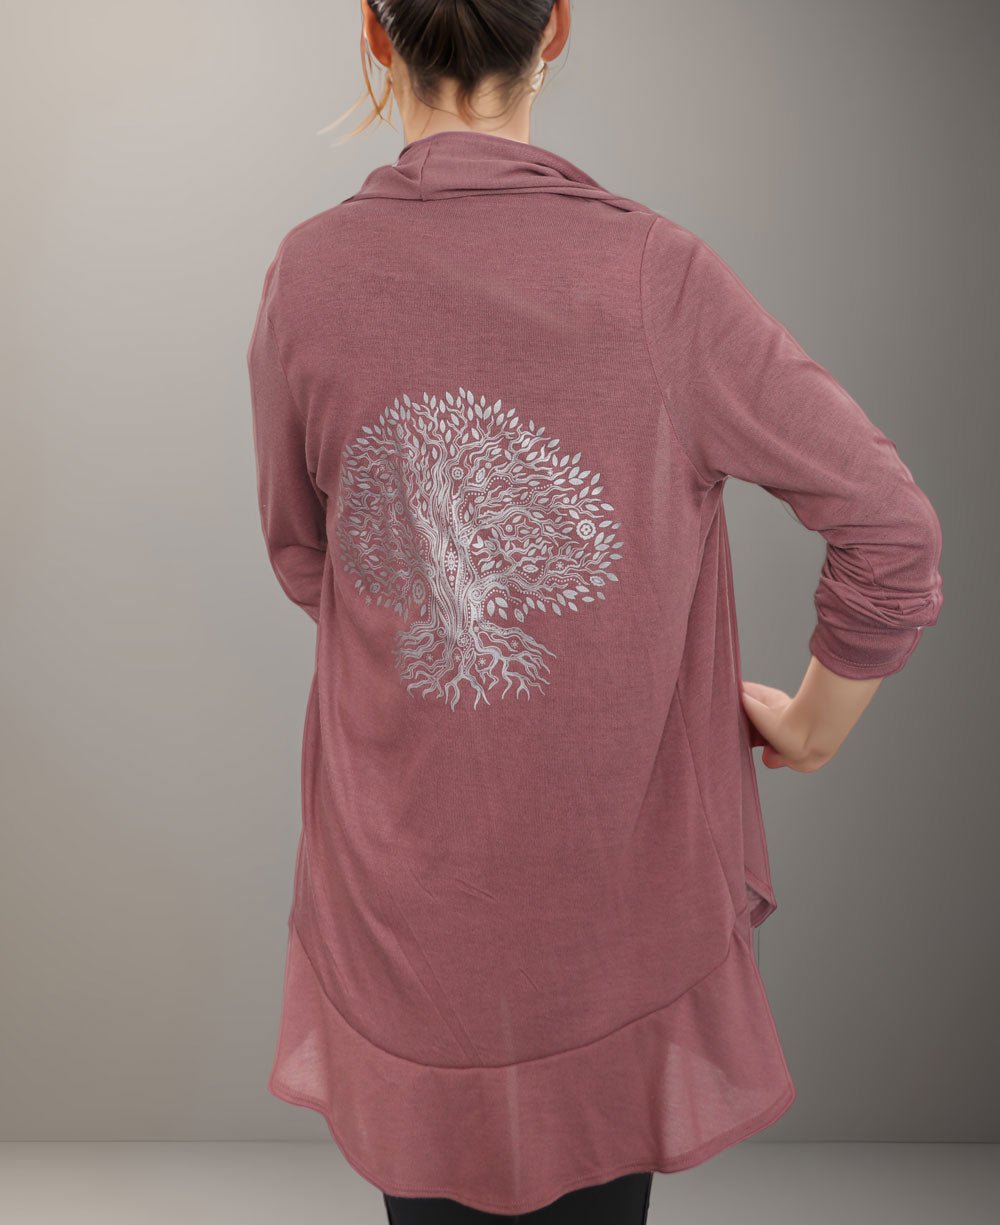 Light Weight Tree of Life Design Women's Long Sleeves Ruffle Cardigan in Dusty Rose - Shirts & Tops S